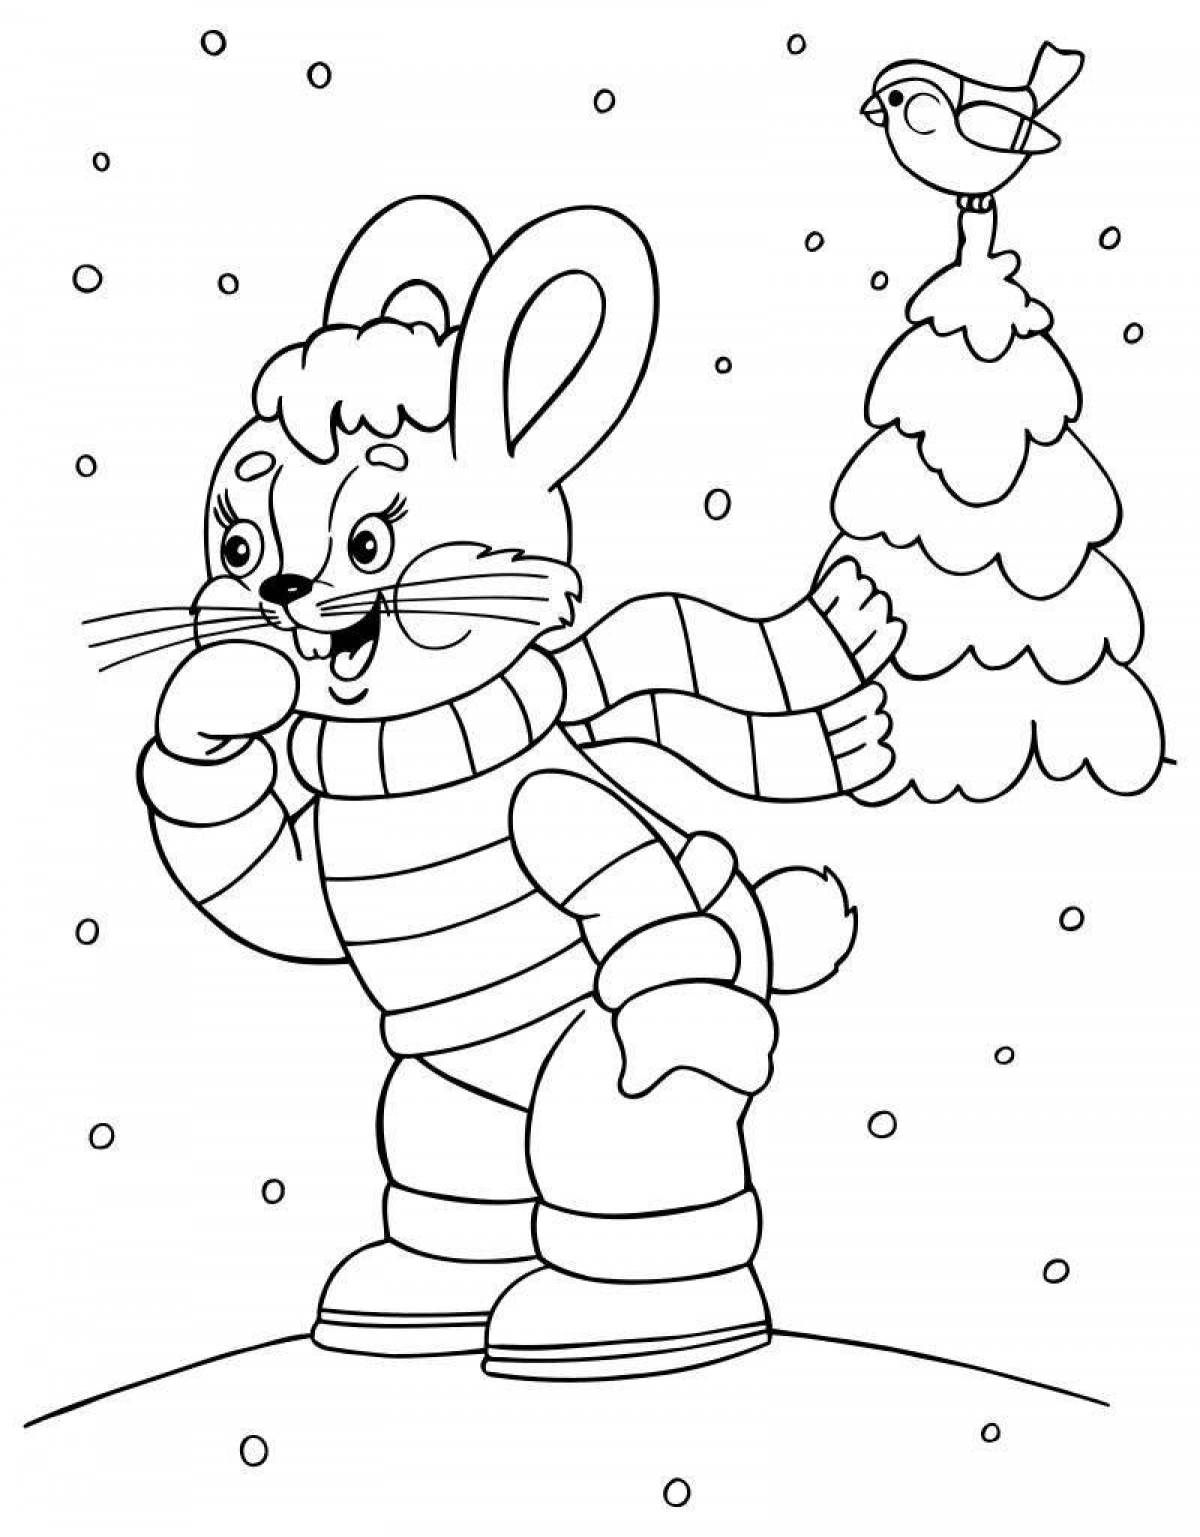 Crazy rabbit and snowman coloring page